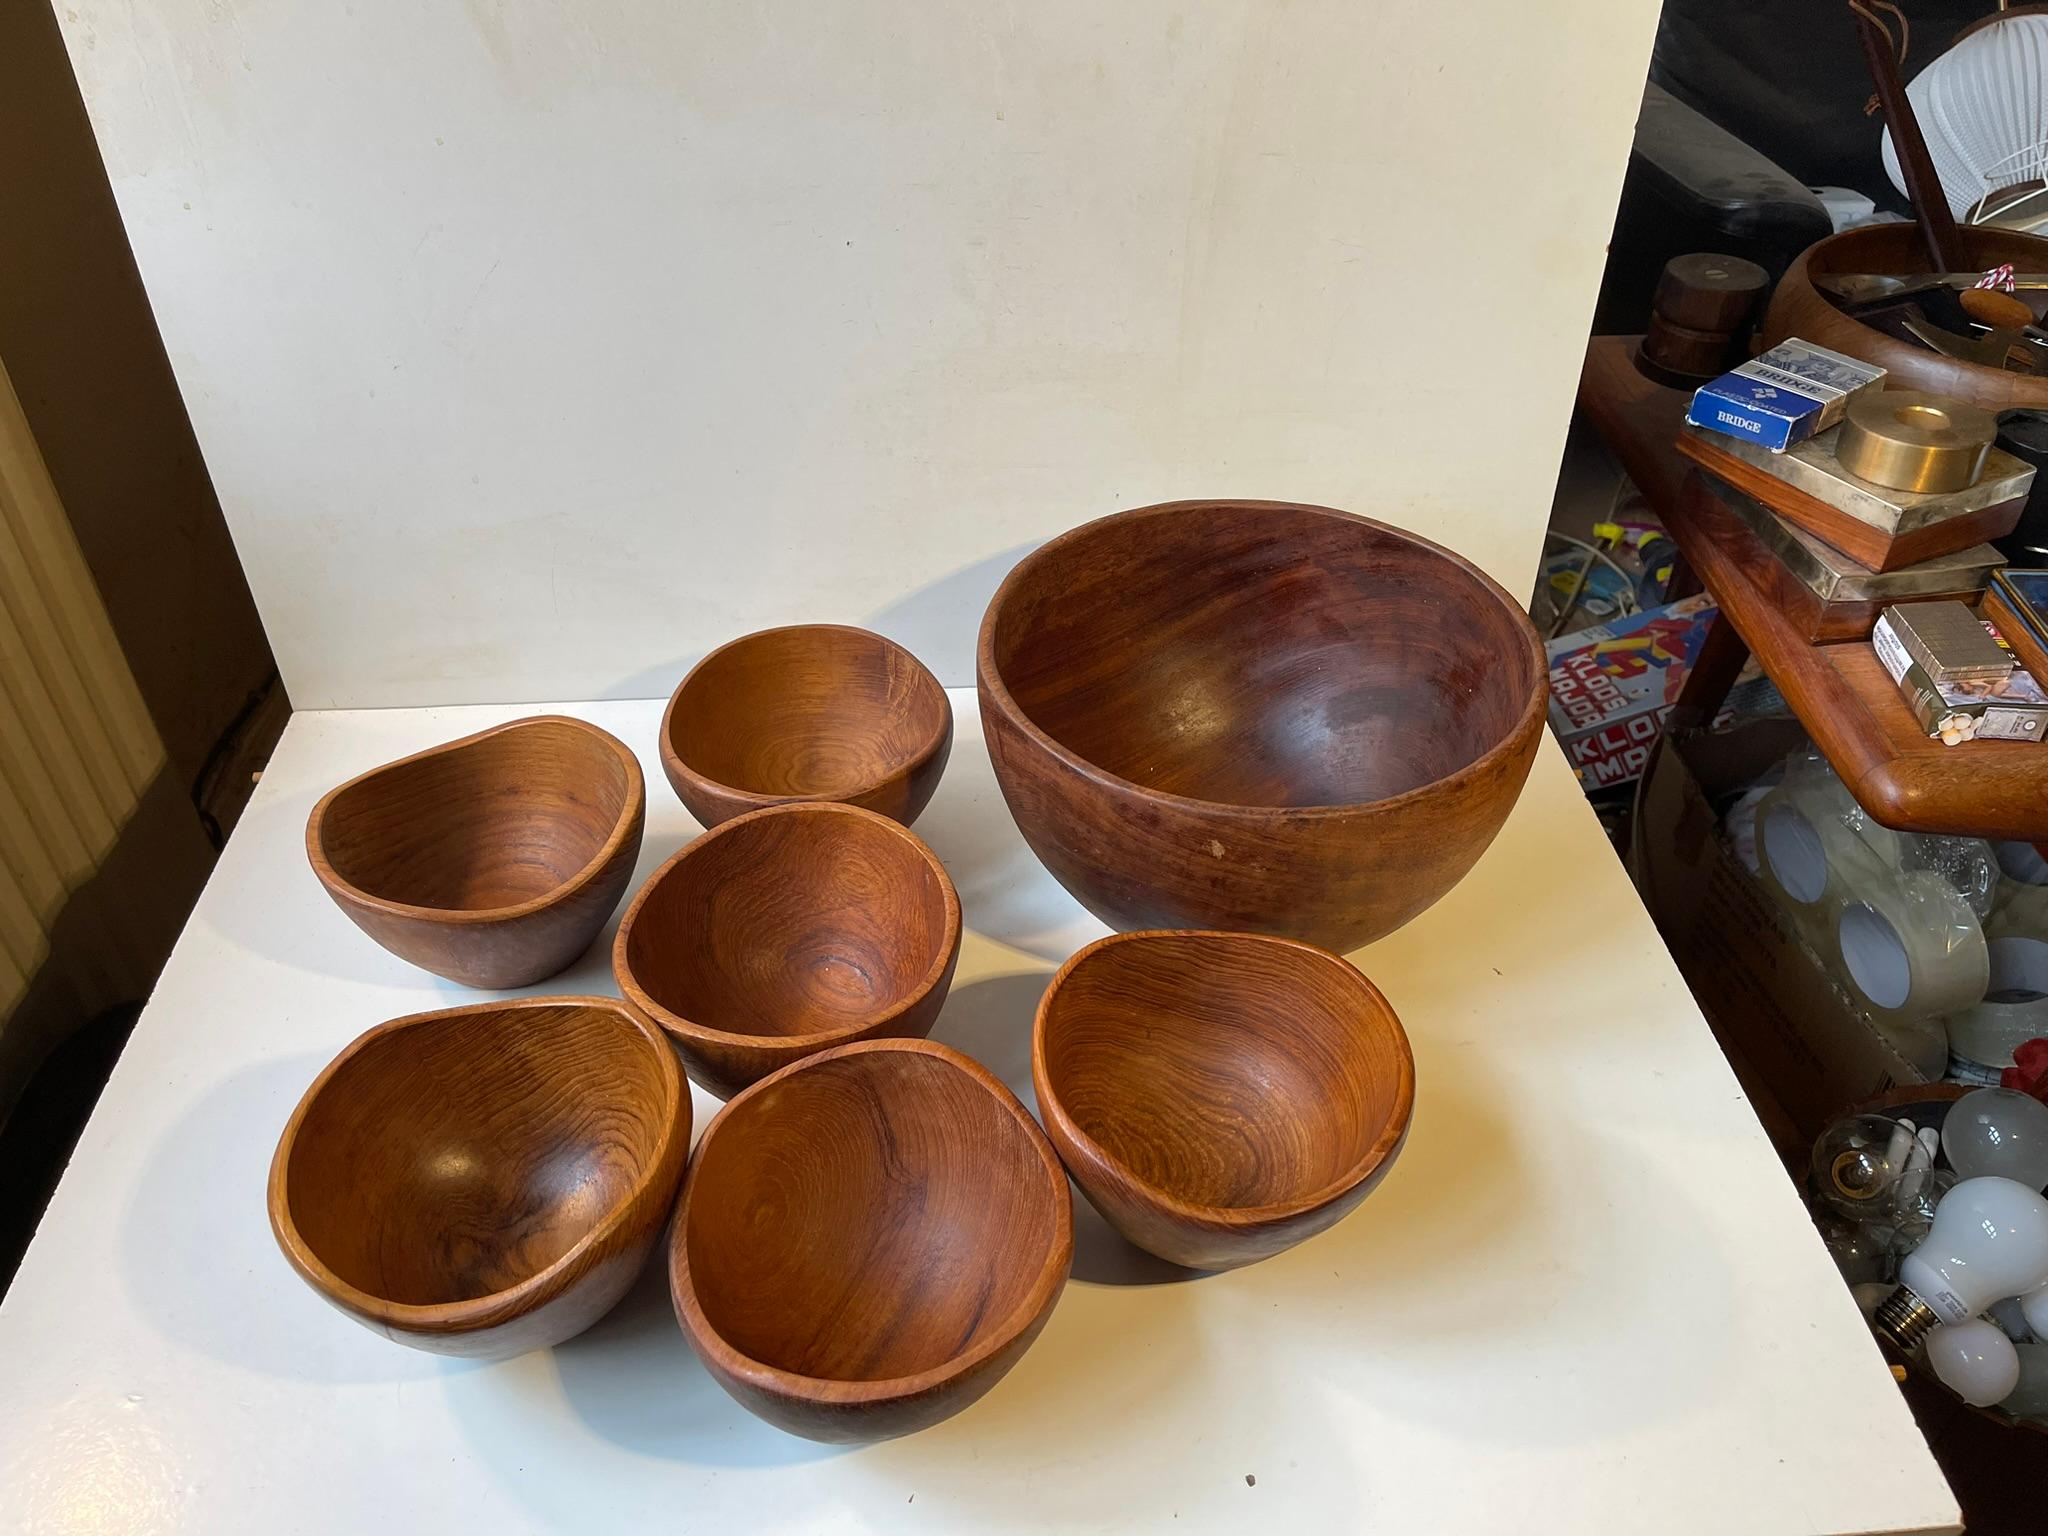 Unusual asymmetrical bowls in solid teak. The set consist of a salad bowl and 6 matching portion bowls. Beautiful hand-finished organic shape with soft curves. Made in-house at ESA Møller in Denmark during the 160s in a style reminiscent of Finn